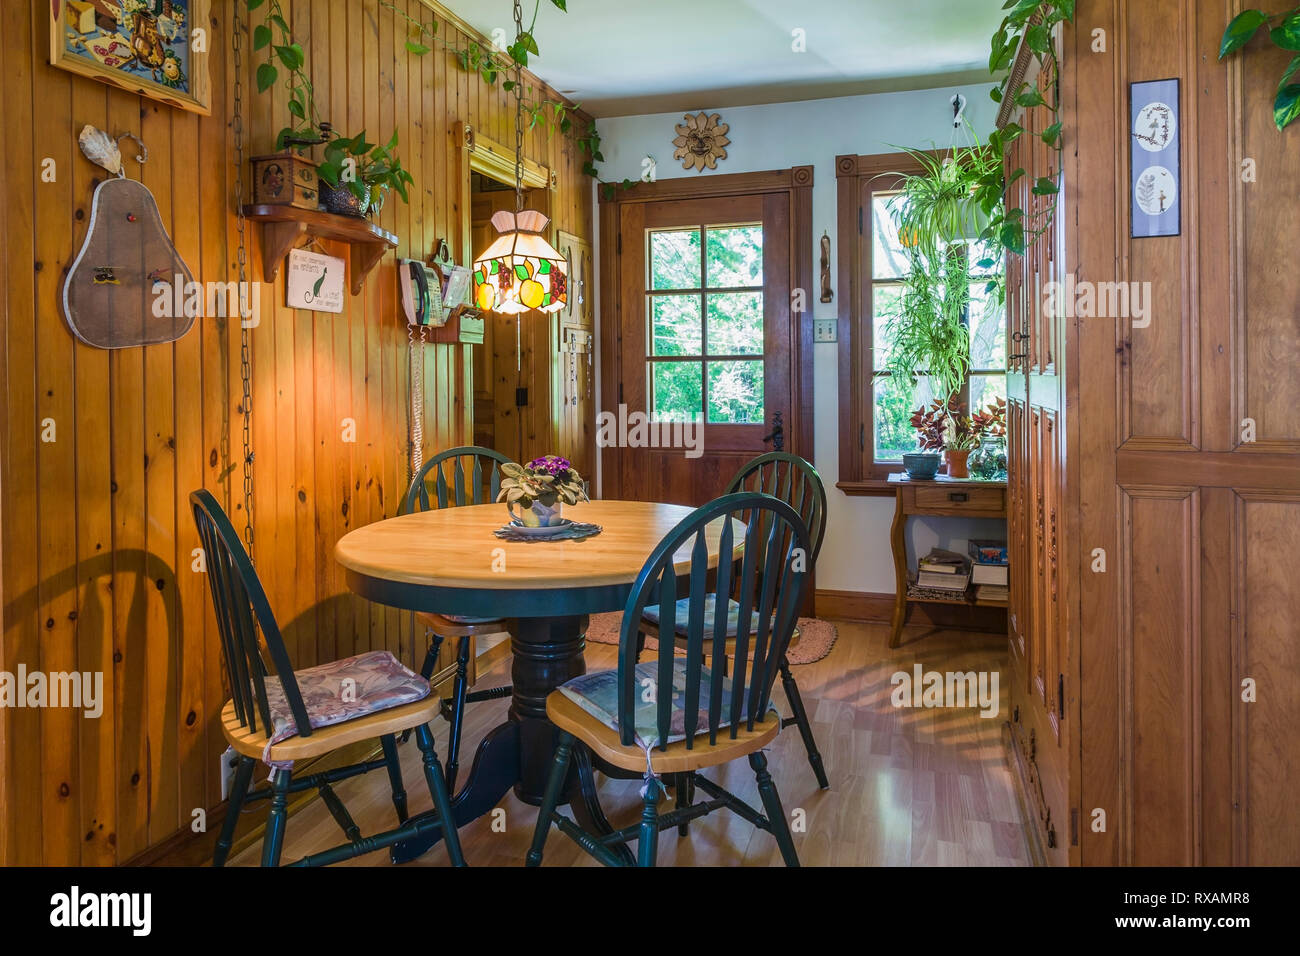 Country kitchen with cherrywood dining table and high back chairs, pinewood cabinets, wood laminate floor inside an old 1927 Canadiana cottage style home, Quebec, Canada. This image is property released. CUPR0321 Stock Photo